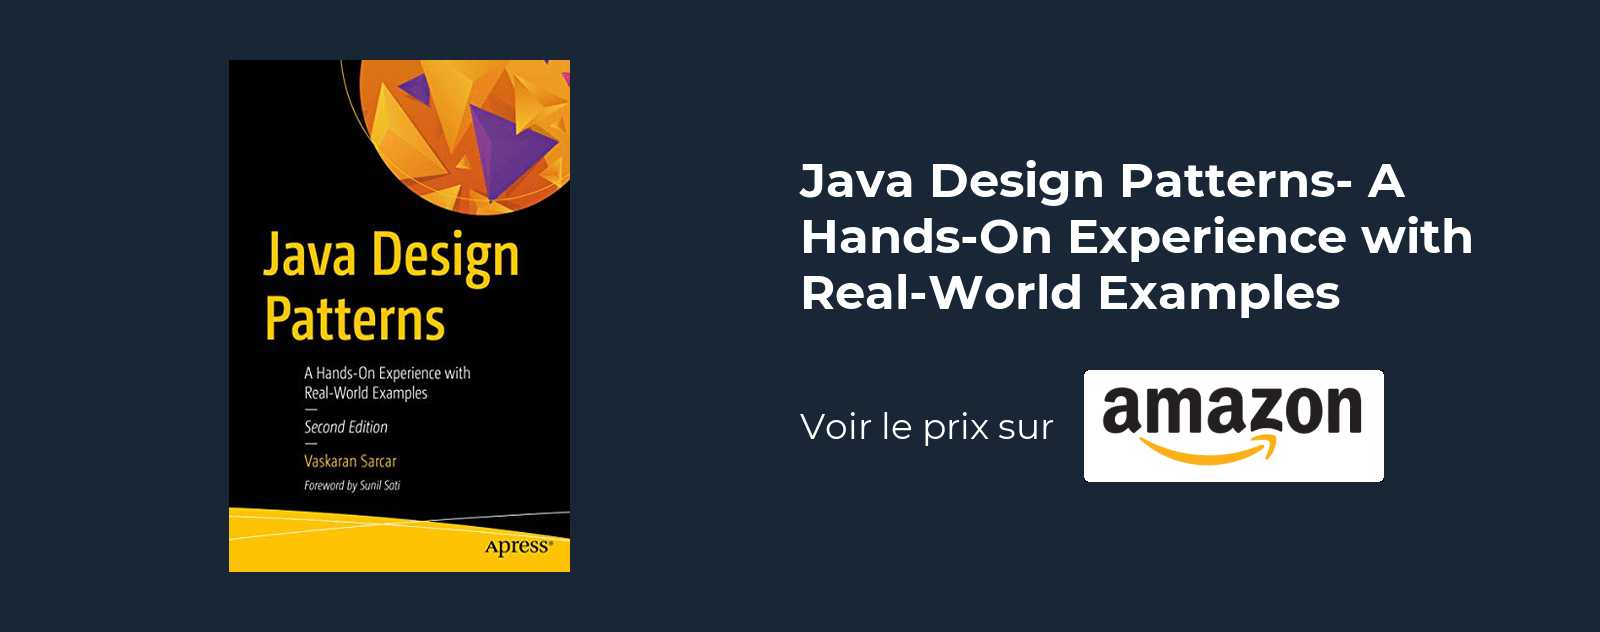 Java Design Patterns- A Hands-On Experience with Real-World Examples